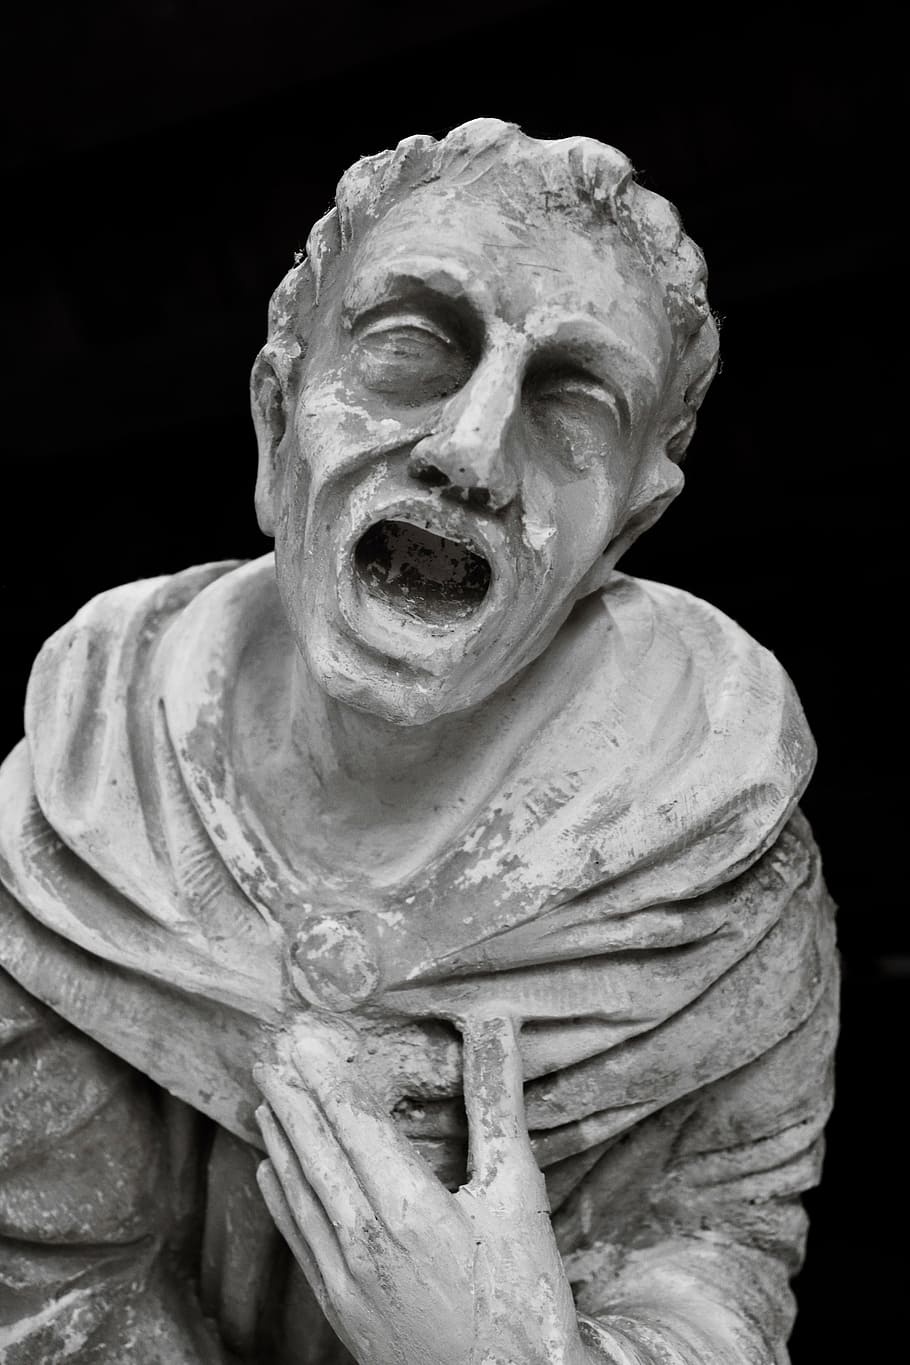 stone statue of screaming man, cry, fear, despair, pain, human